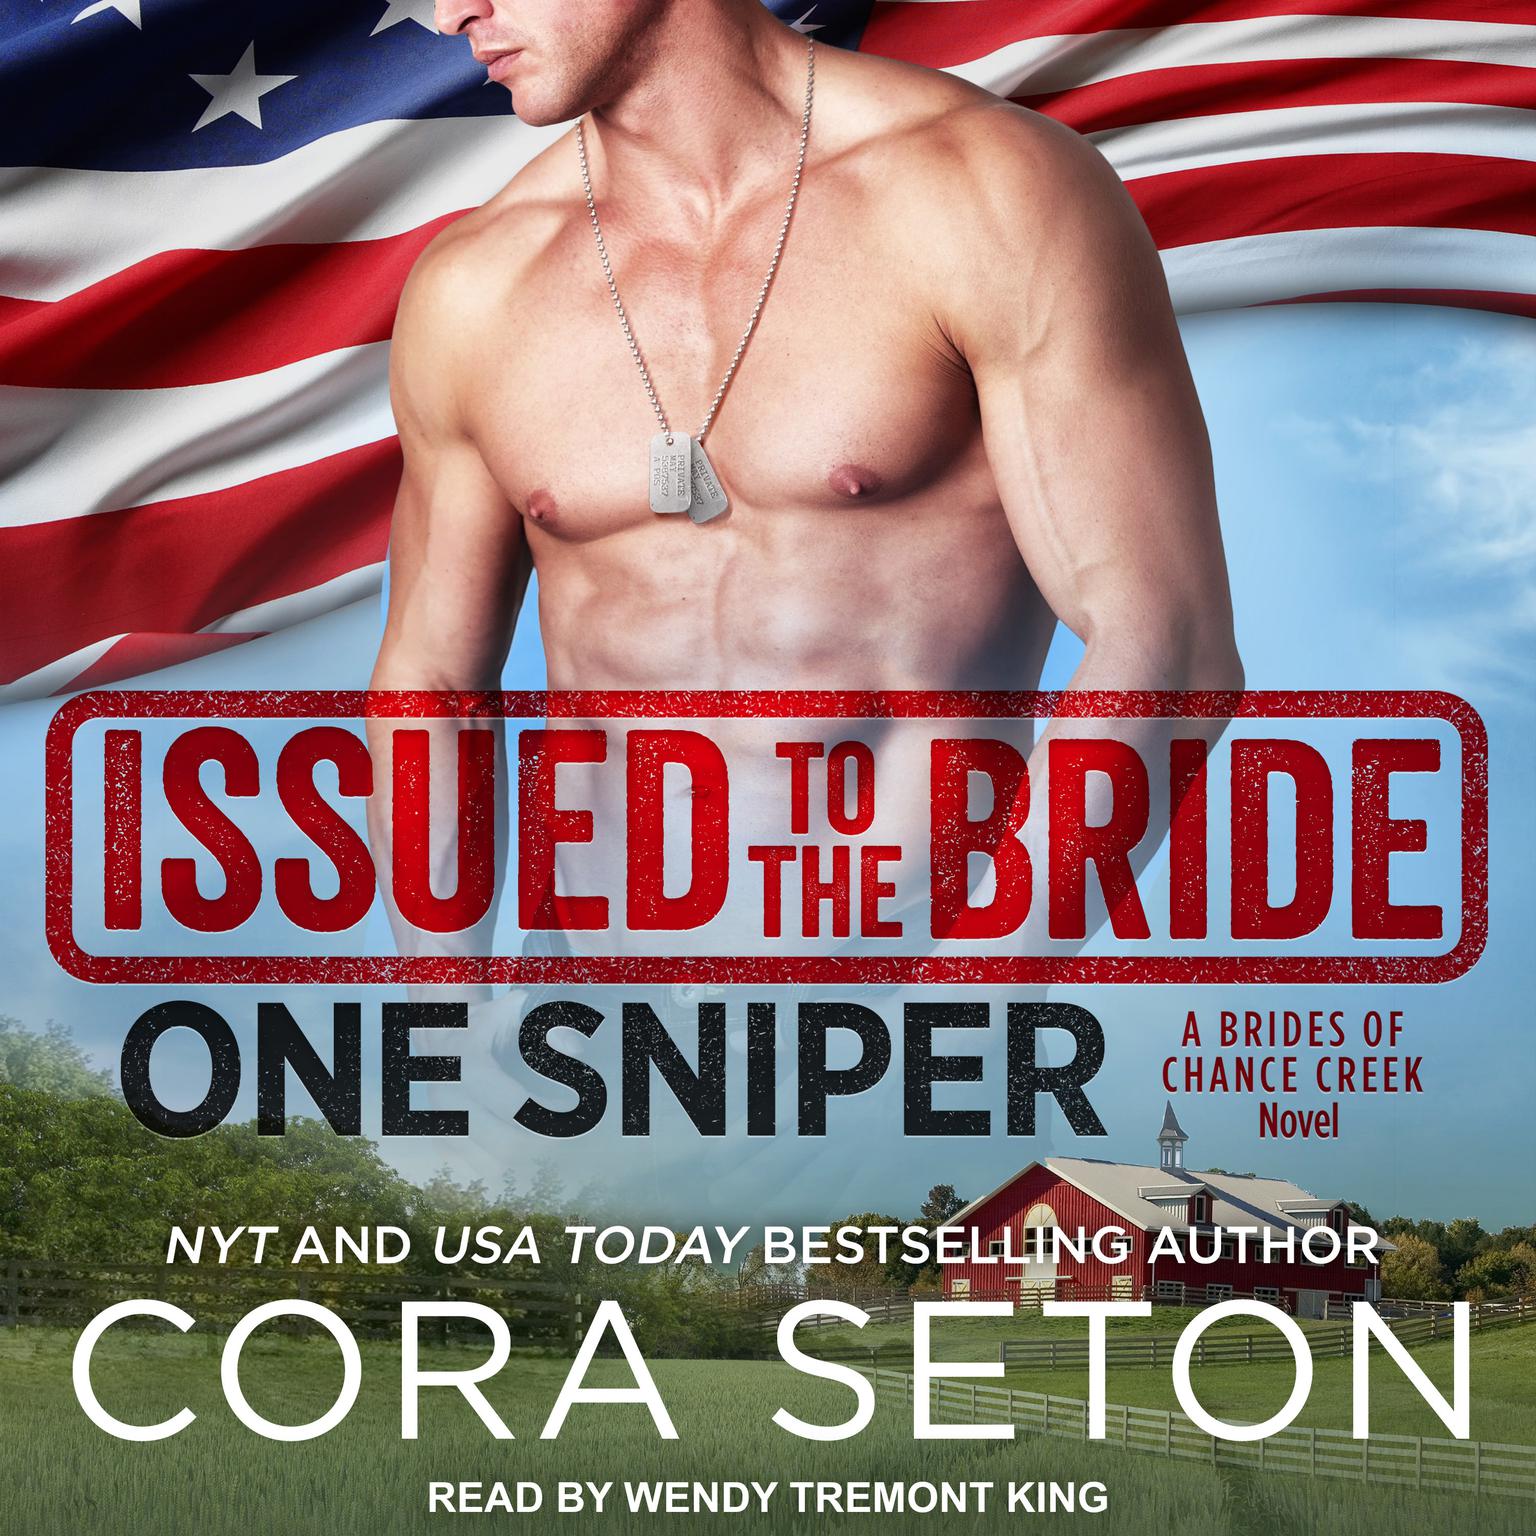 Issued to the Bride One Sniper Audiobook, by Cora Seton